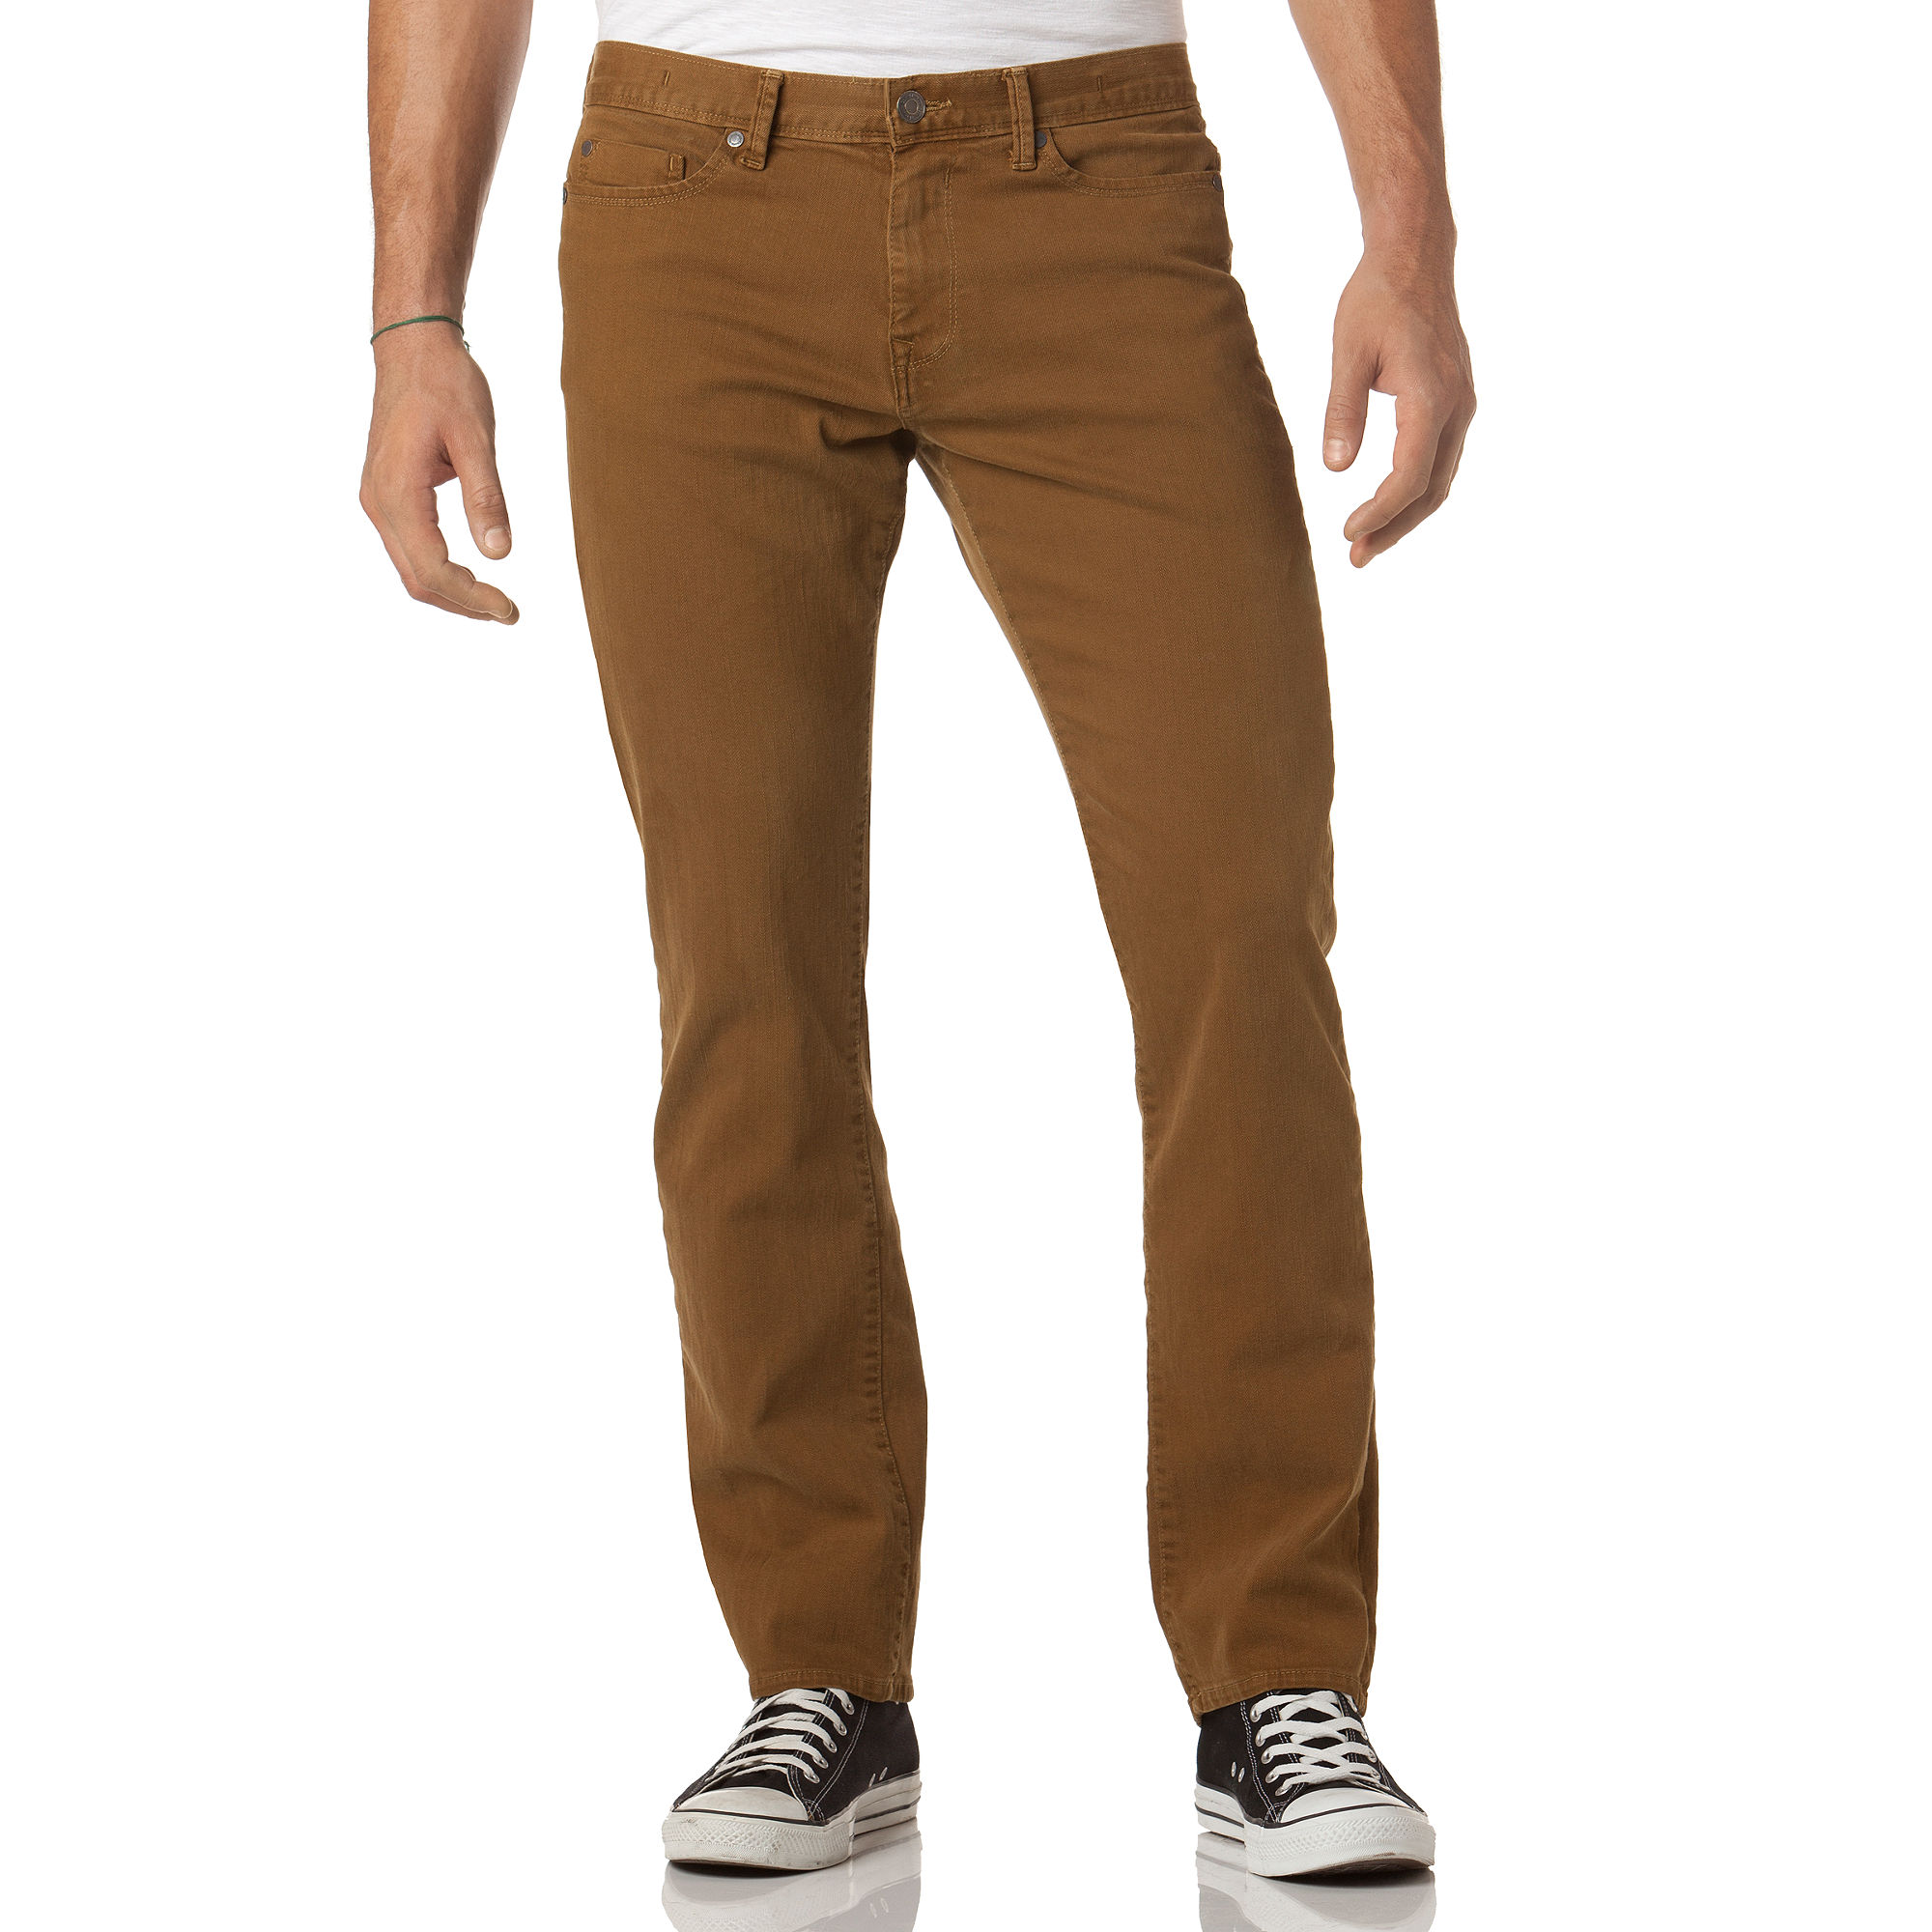 Calvin Klein Slim Straight Color Wash Jeans in Brown for Men - Lyst